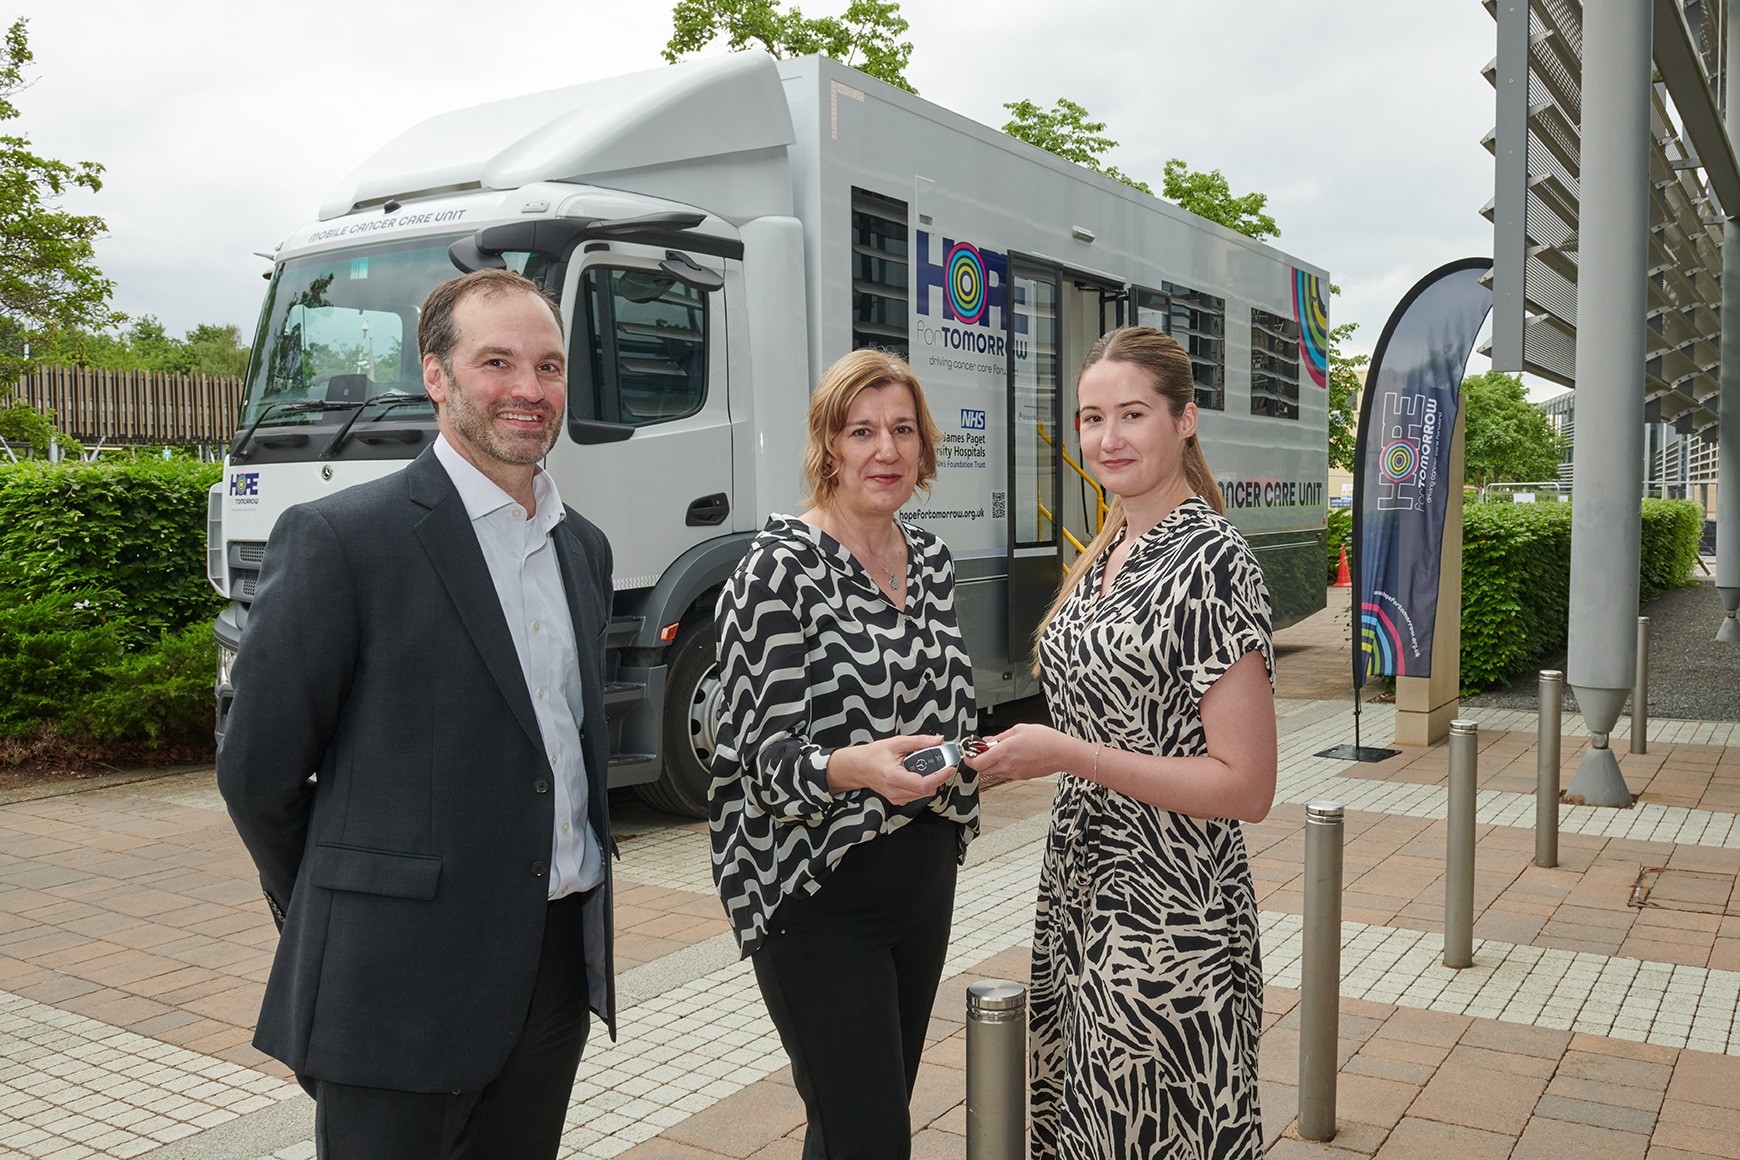 Mobile cancer care unit, funded by Bristol Myers-Squibb, launched at ARC Uxbridge